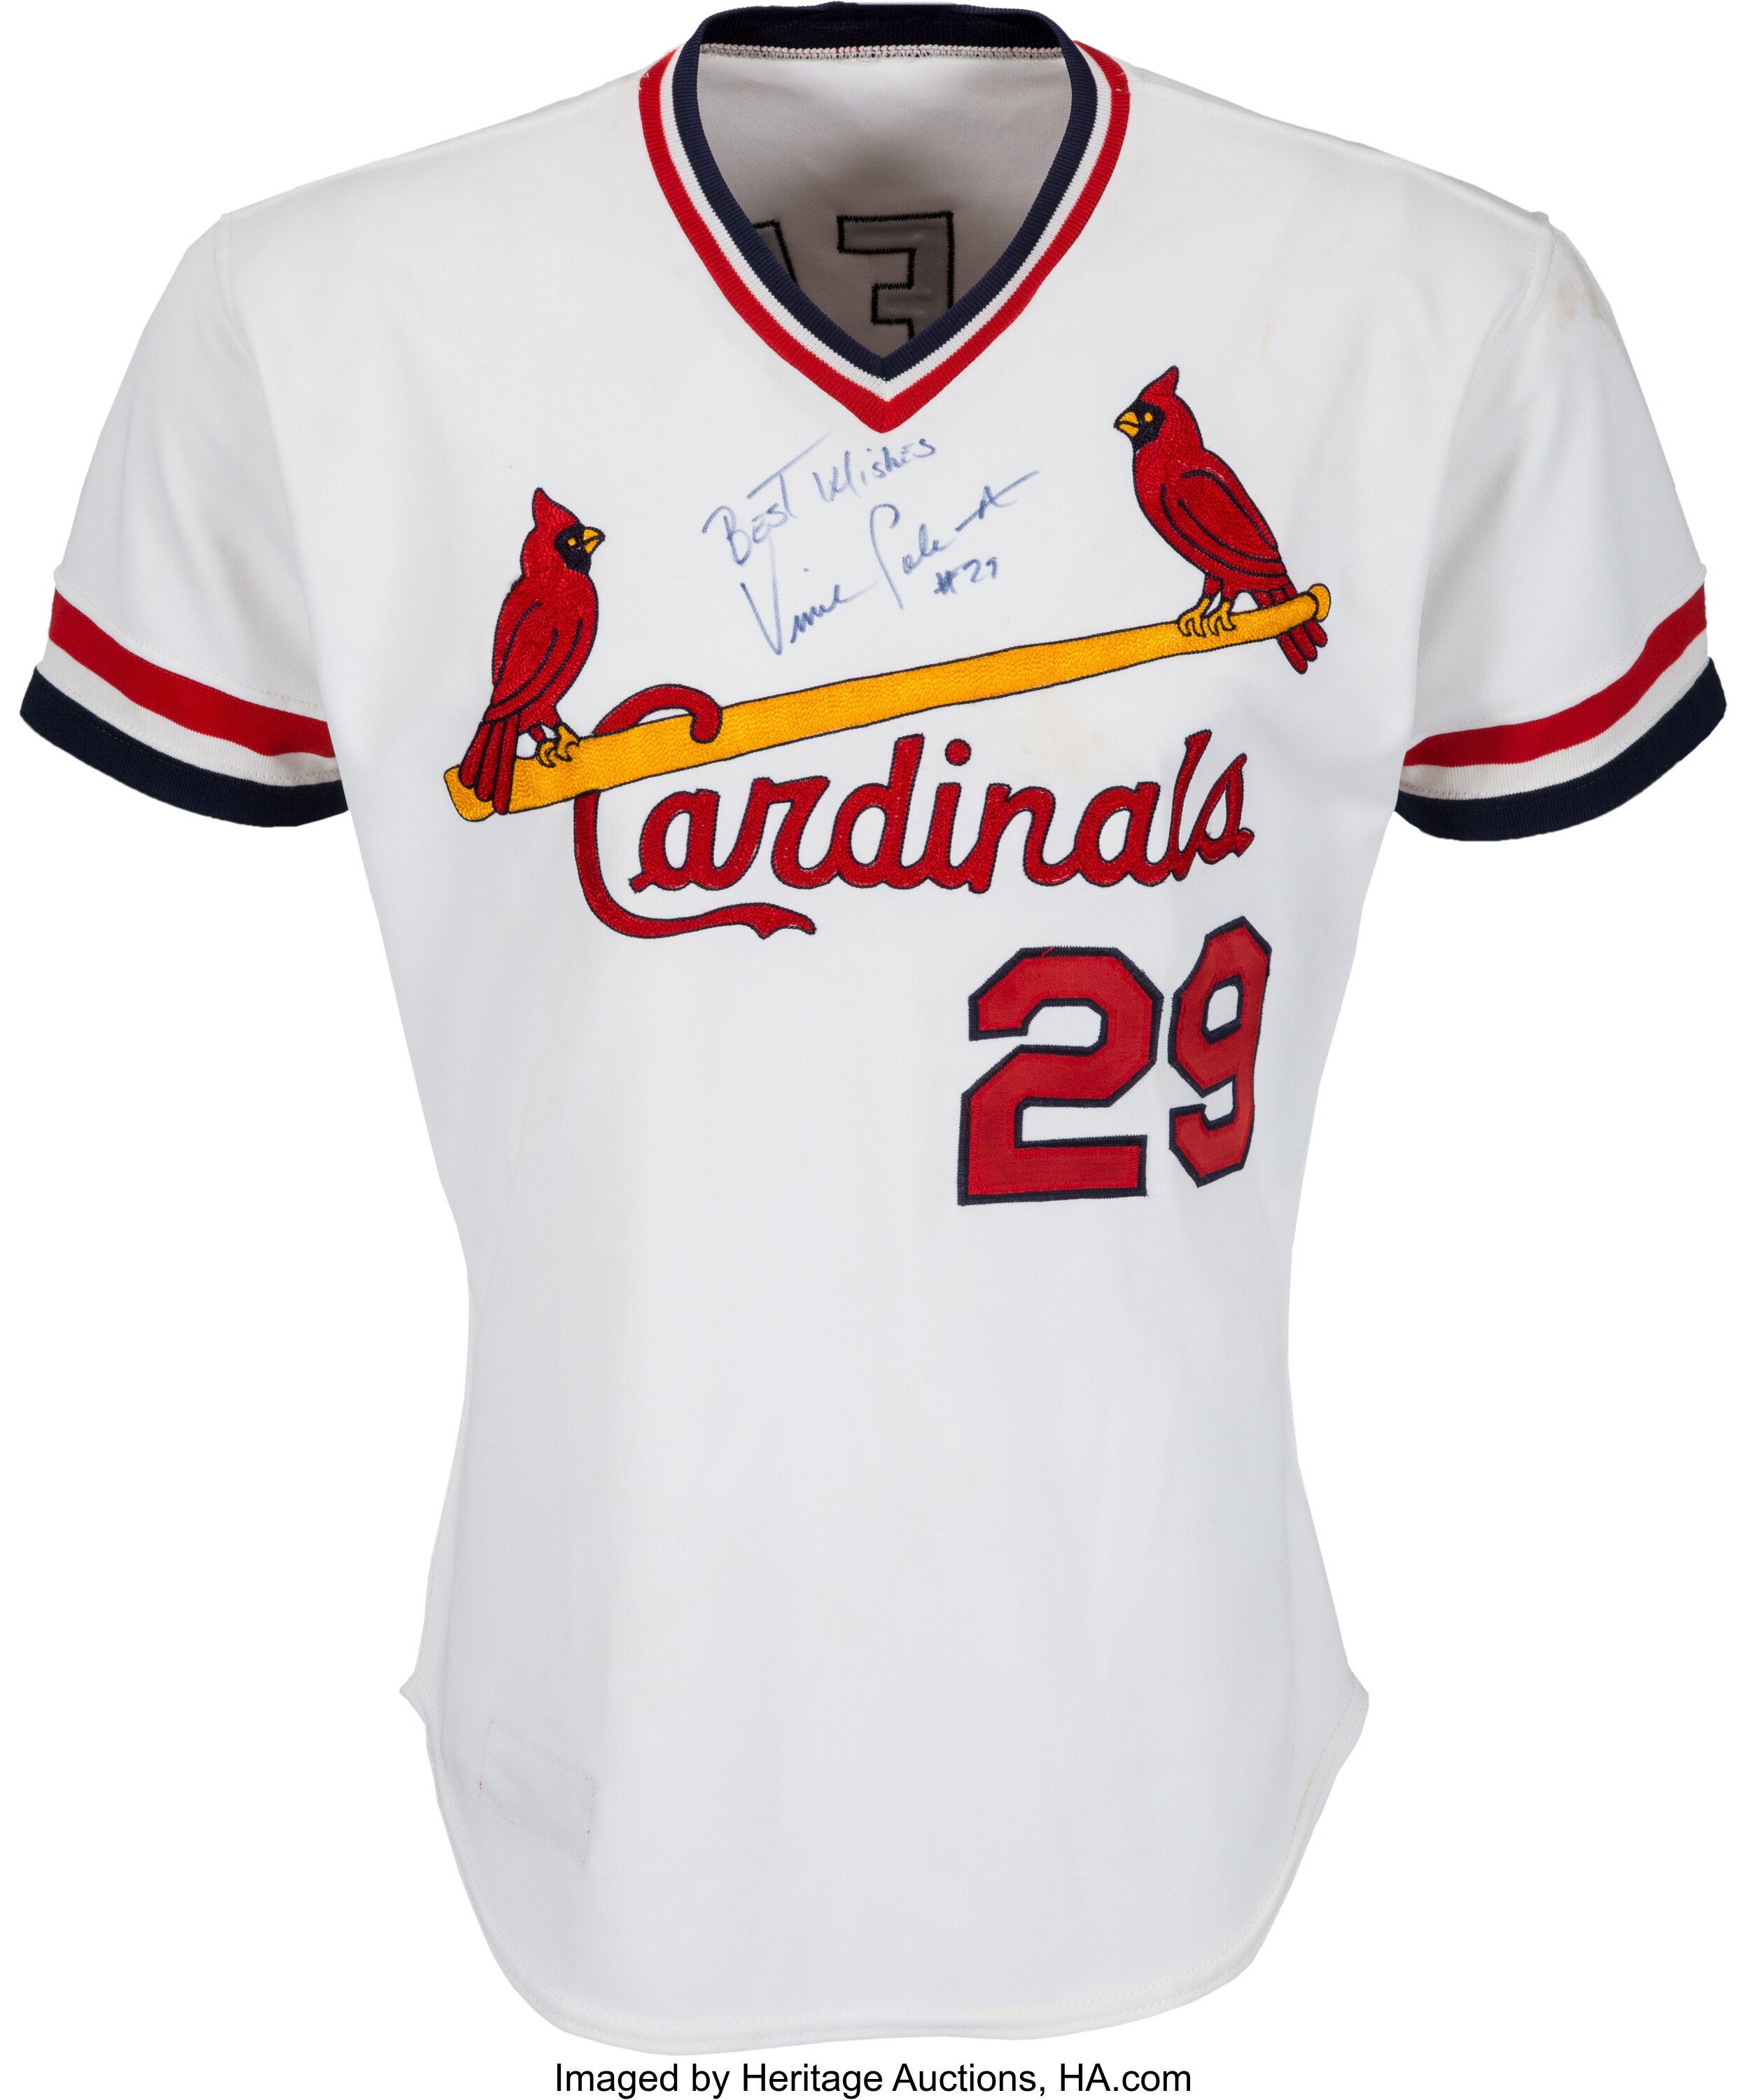 Cardinals add retro jersey for Saturday home games – Daily Freeman